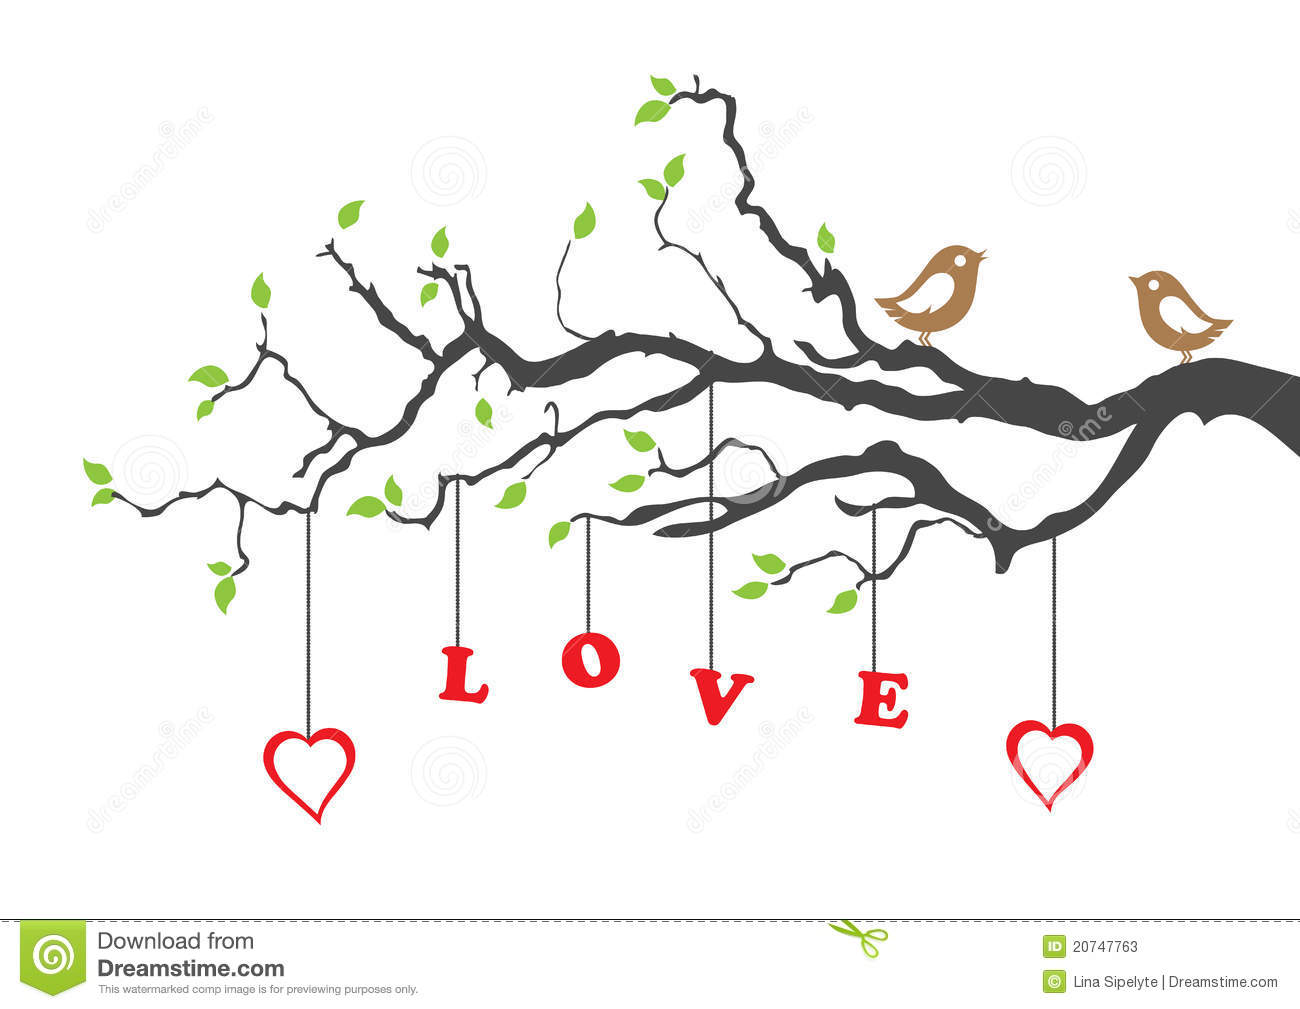 Two Love Birds And Love Tree Greeting Card  This Image Is A Vector